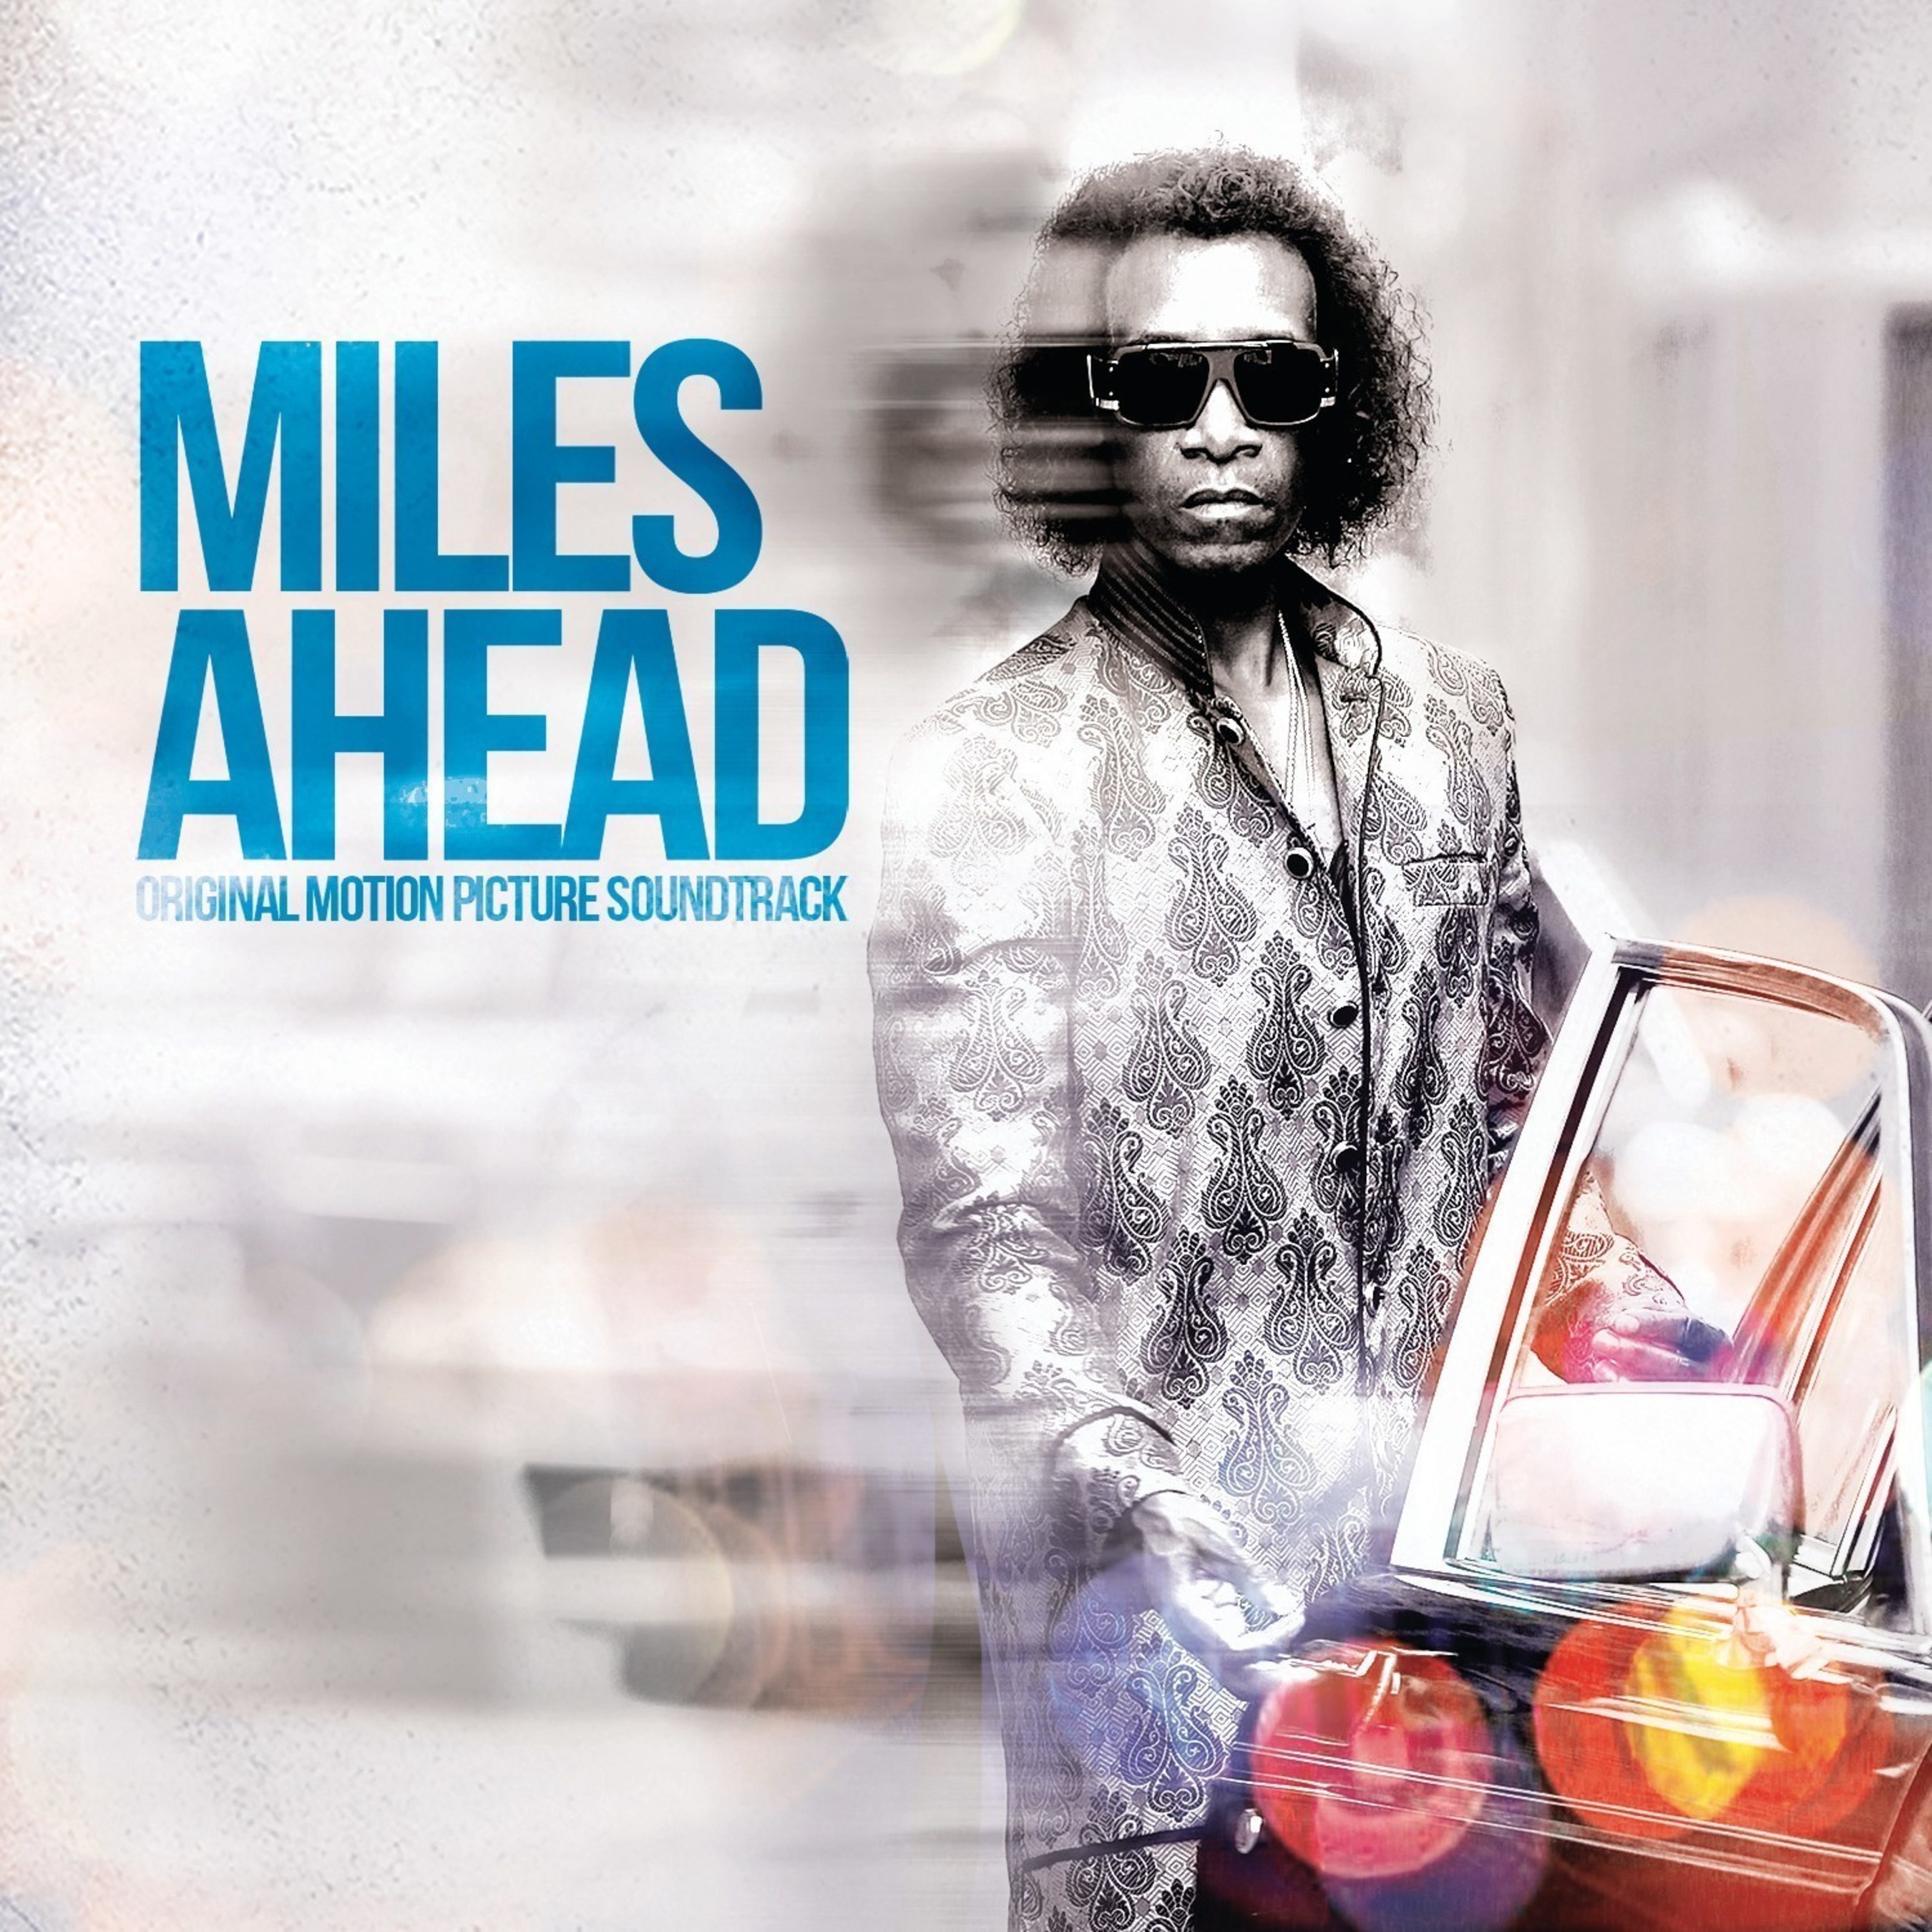 MILES AHEAD - Original Motion Picture Soundtrack will be available Friday, April 1. A cinematic exploration of the life and music of Miles Davis, the movie feature "MILES AHEAD" marks the directorial debut of Don Cheadle, who co-wrote the screenplay (with Steven Baigelman) and stars as the legendary musician in the film.